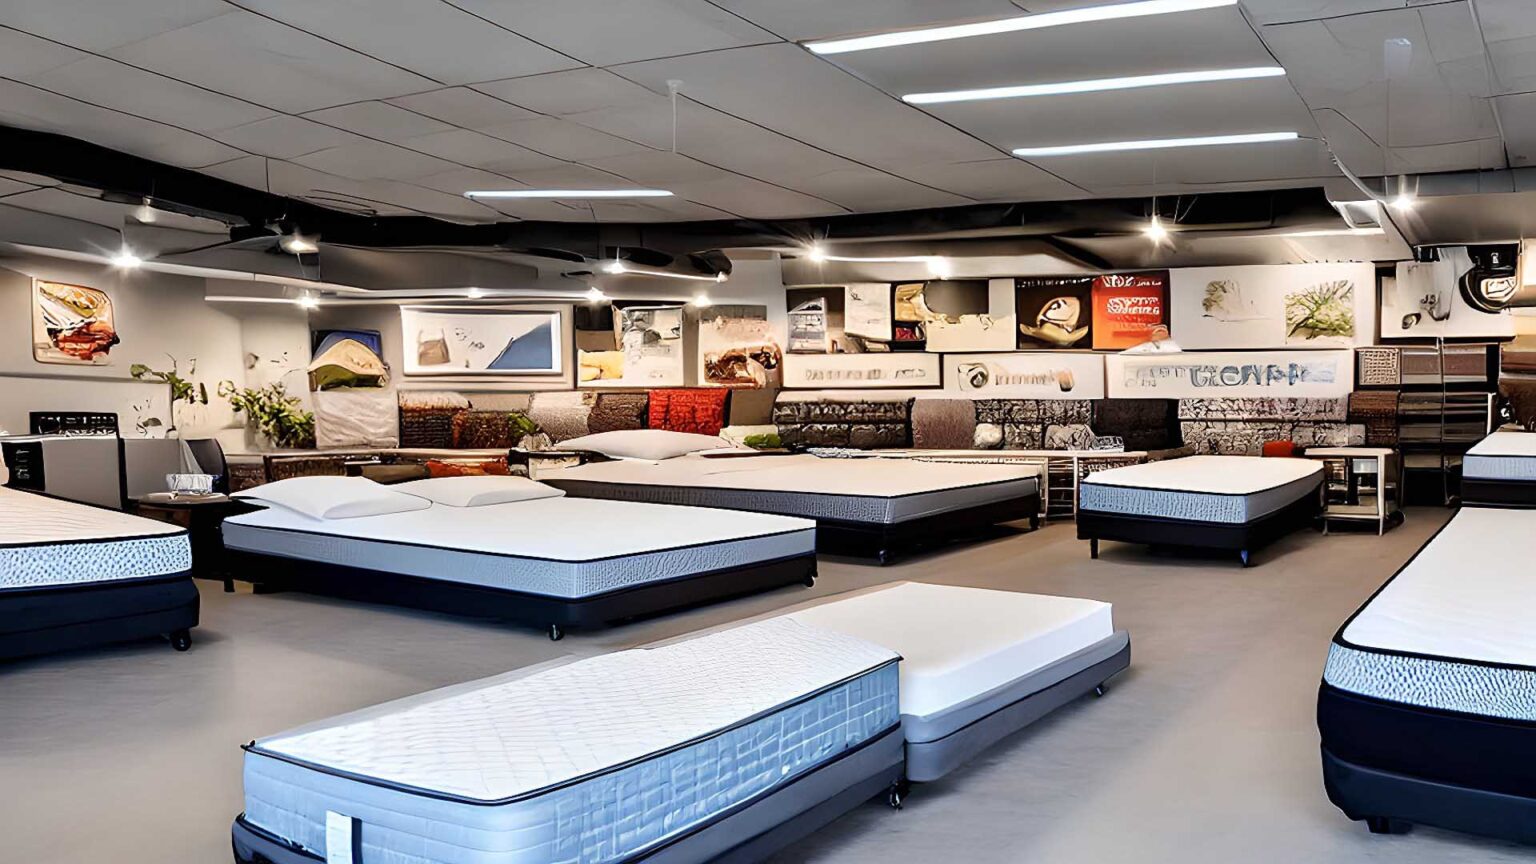 Mattress Stores, mattress dealers, and mattress retailers near me in Peoria, IL